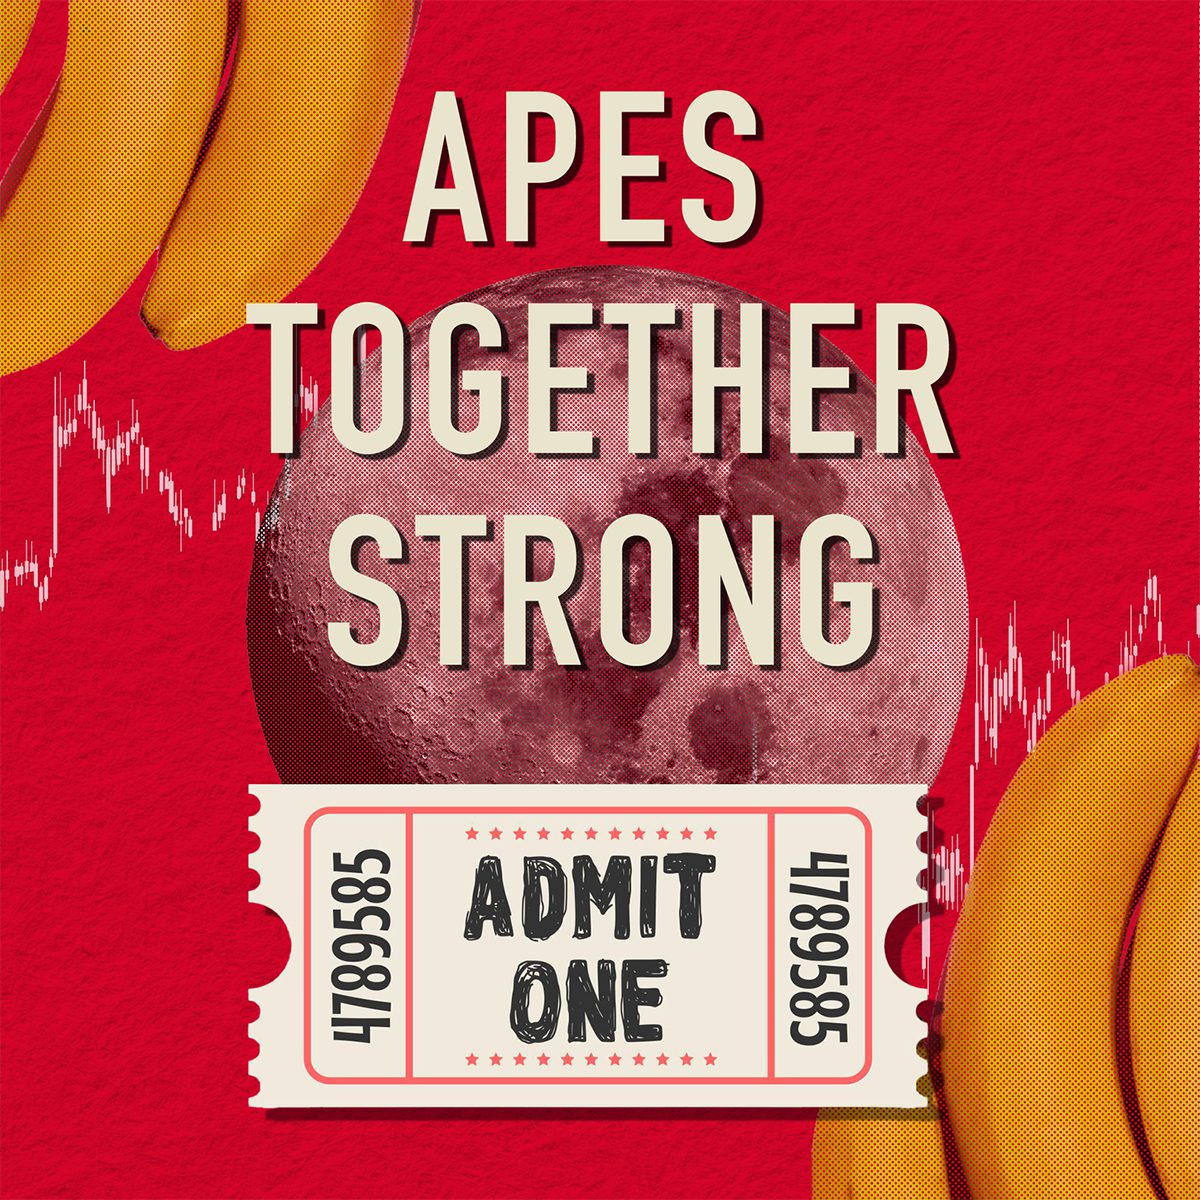 Apes Together Strong: token-gated NFT video streaming by NJJ Publishing